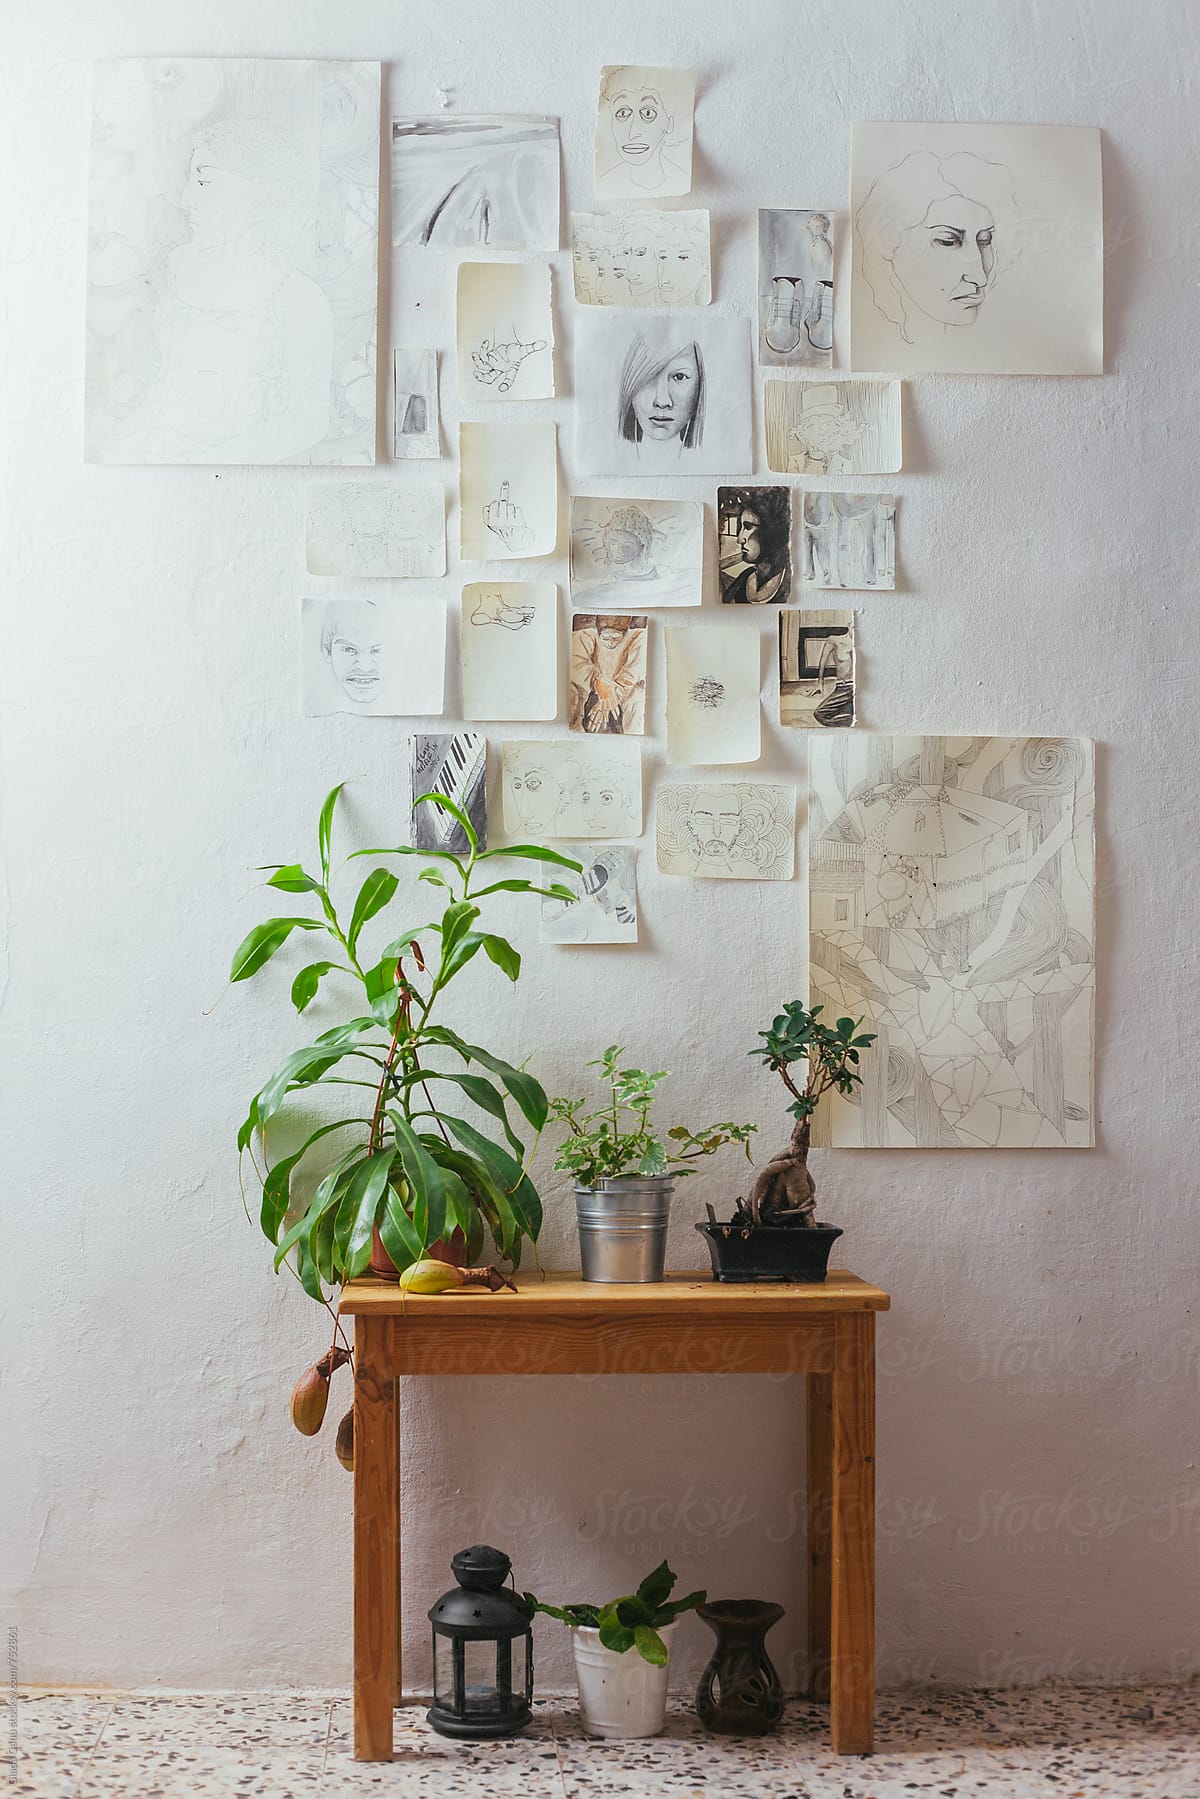 Plants on a wooden table with drawings on a white wall